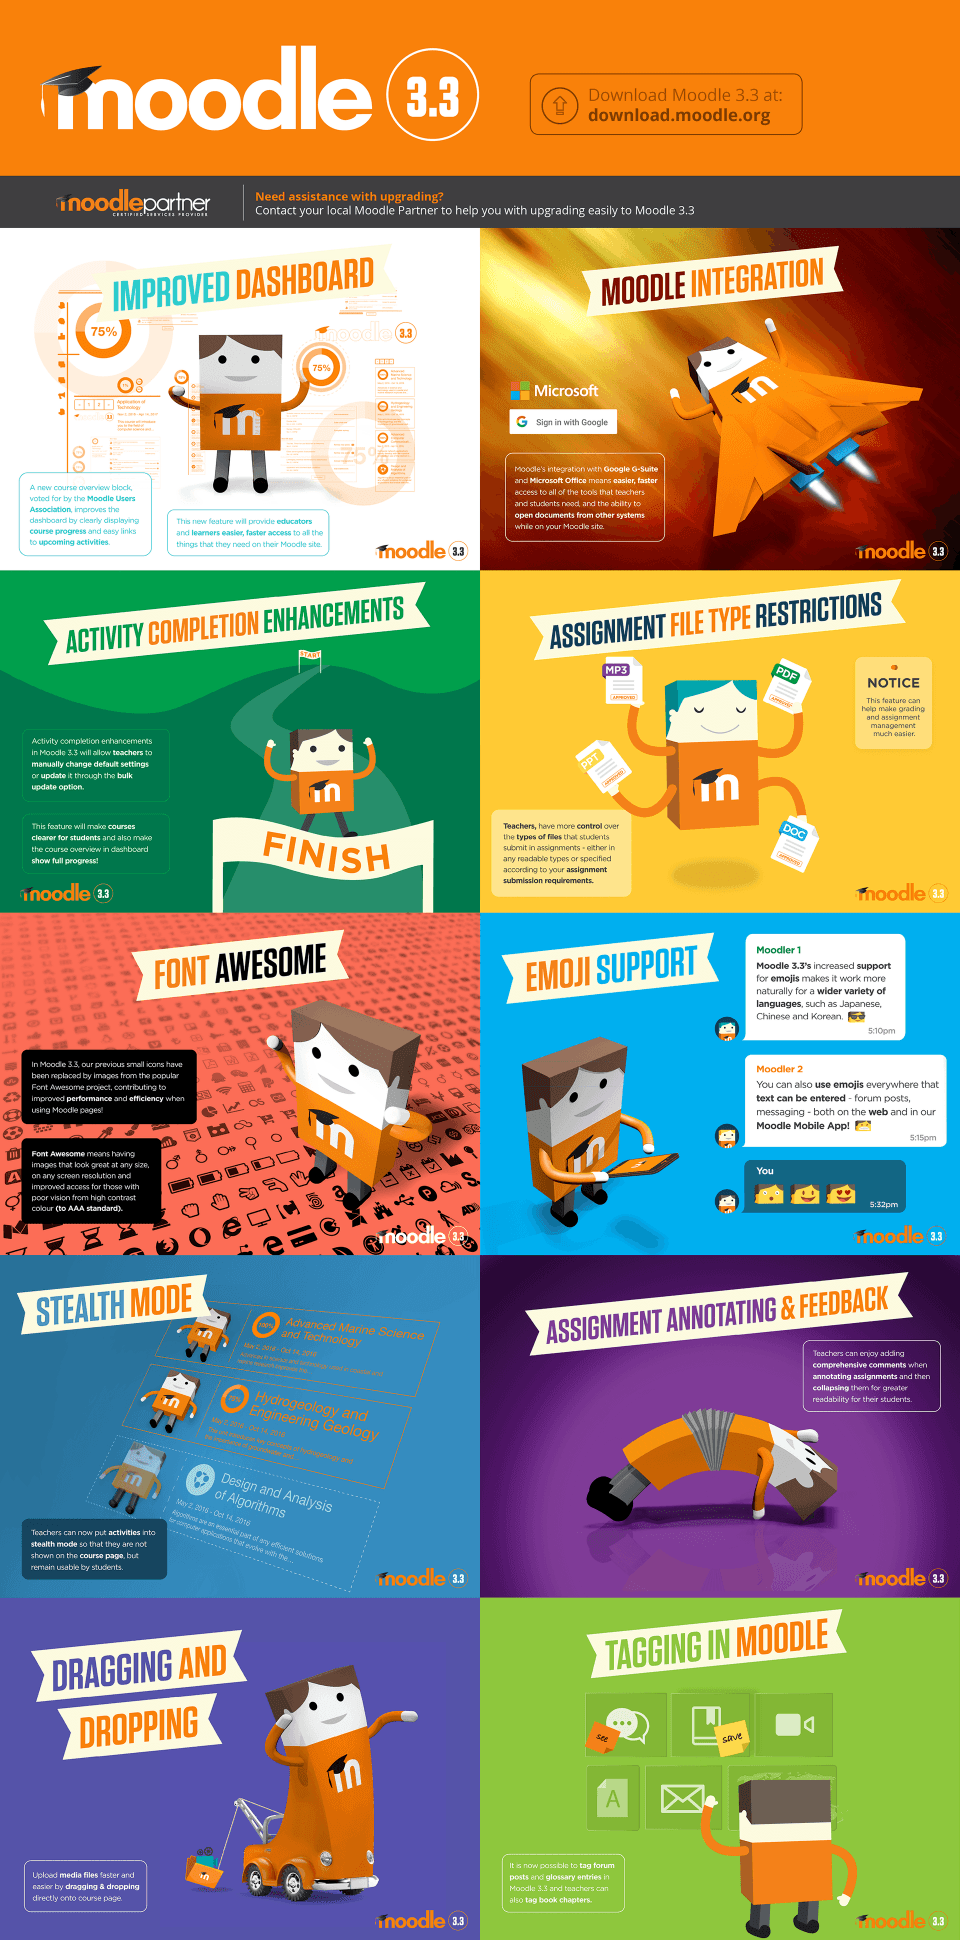 Moodle 3.3 Improvements That Empower Educators in their Online Classrooms Infographic